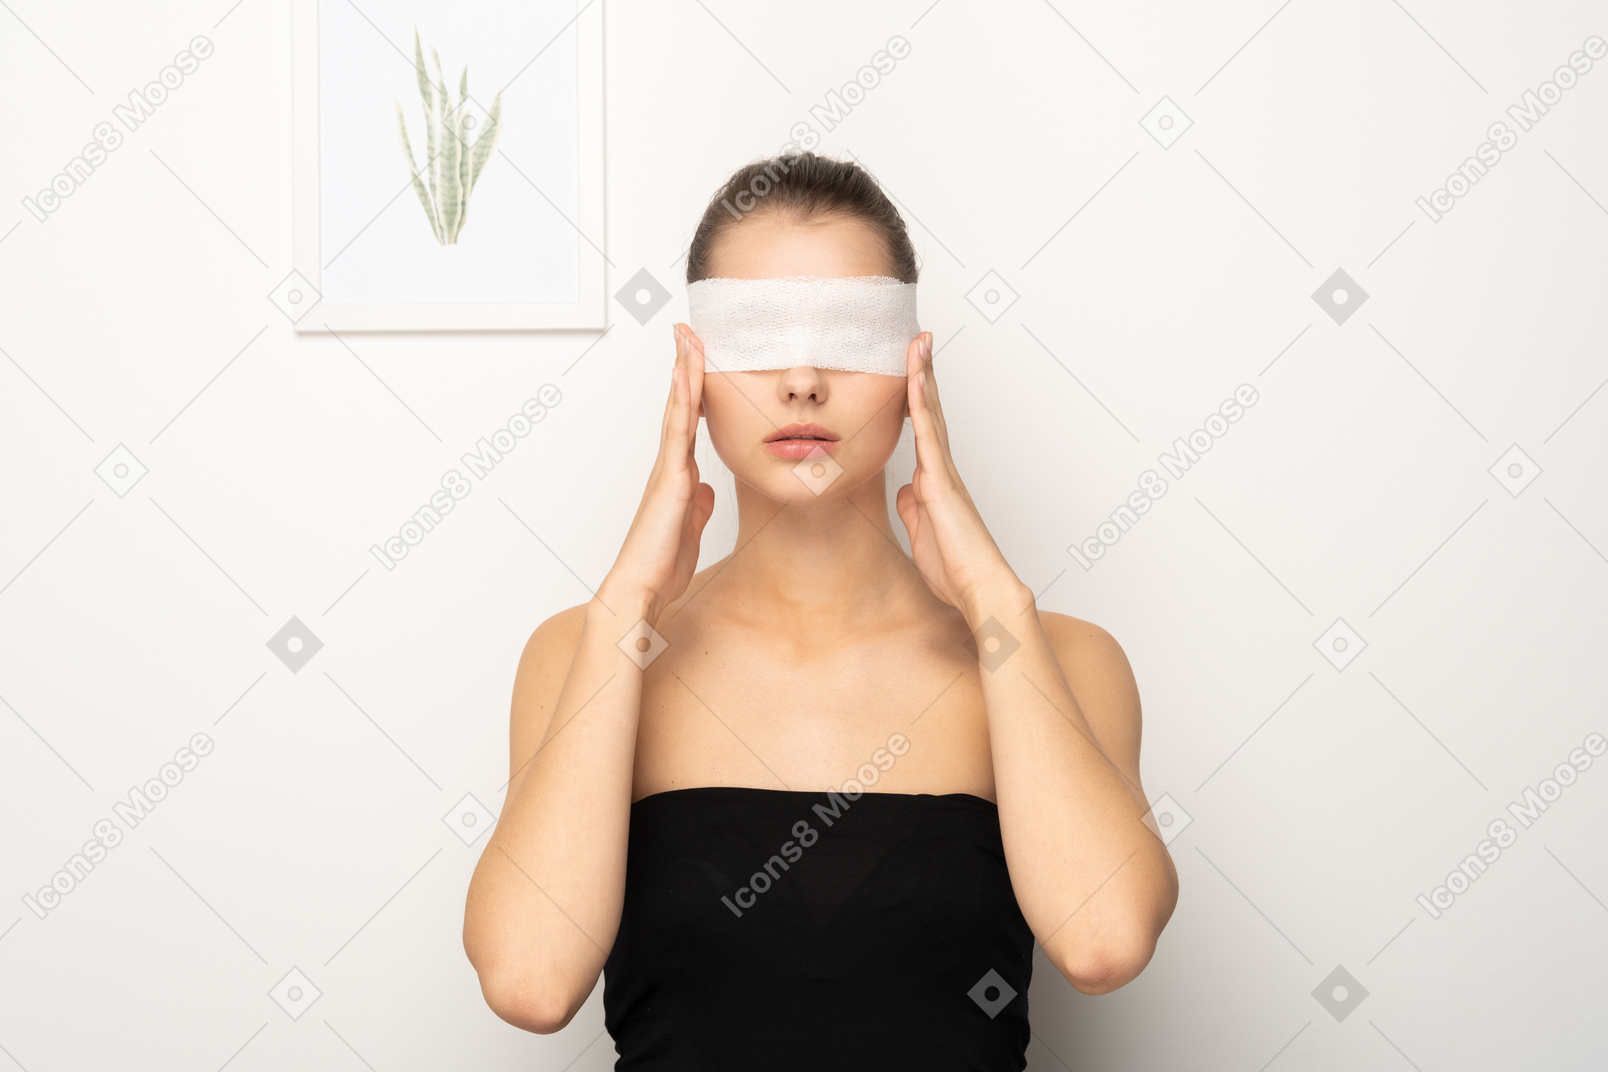 Woman with eye bandage touching sides of face